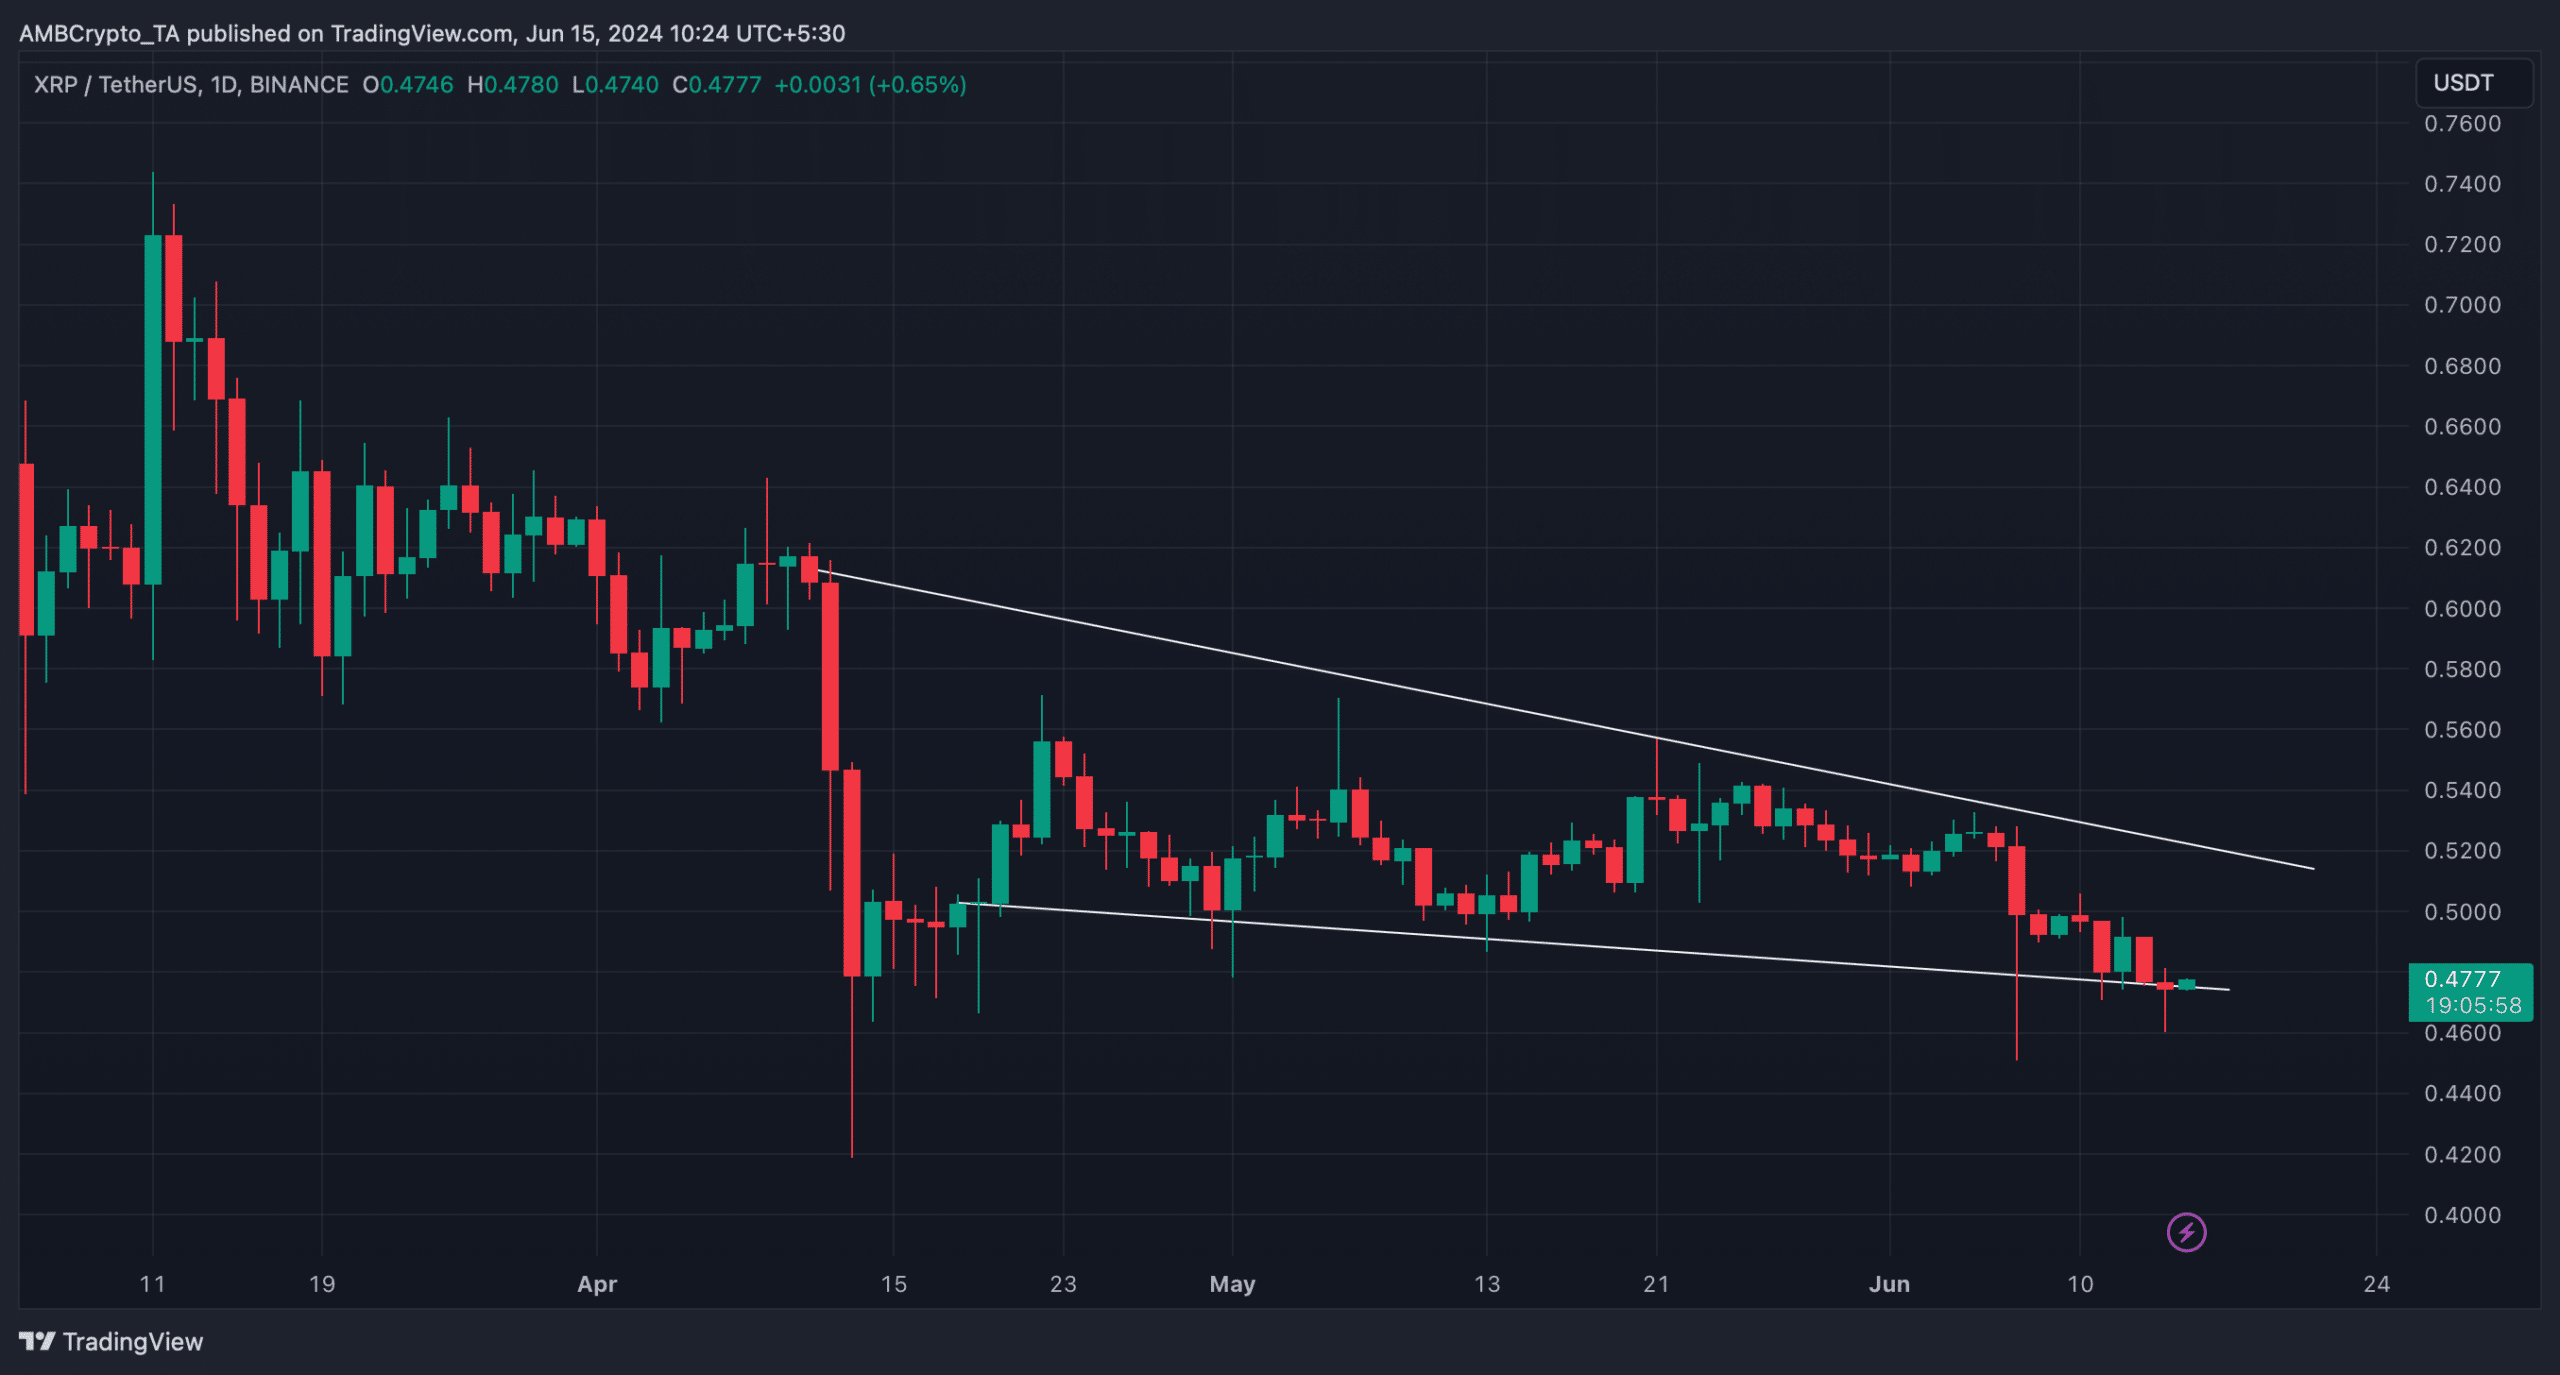 Falling wedge pattern on XRP's chart